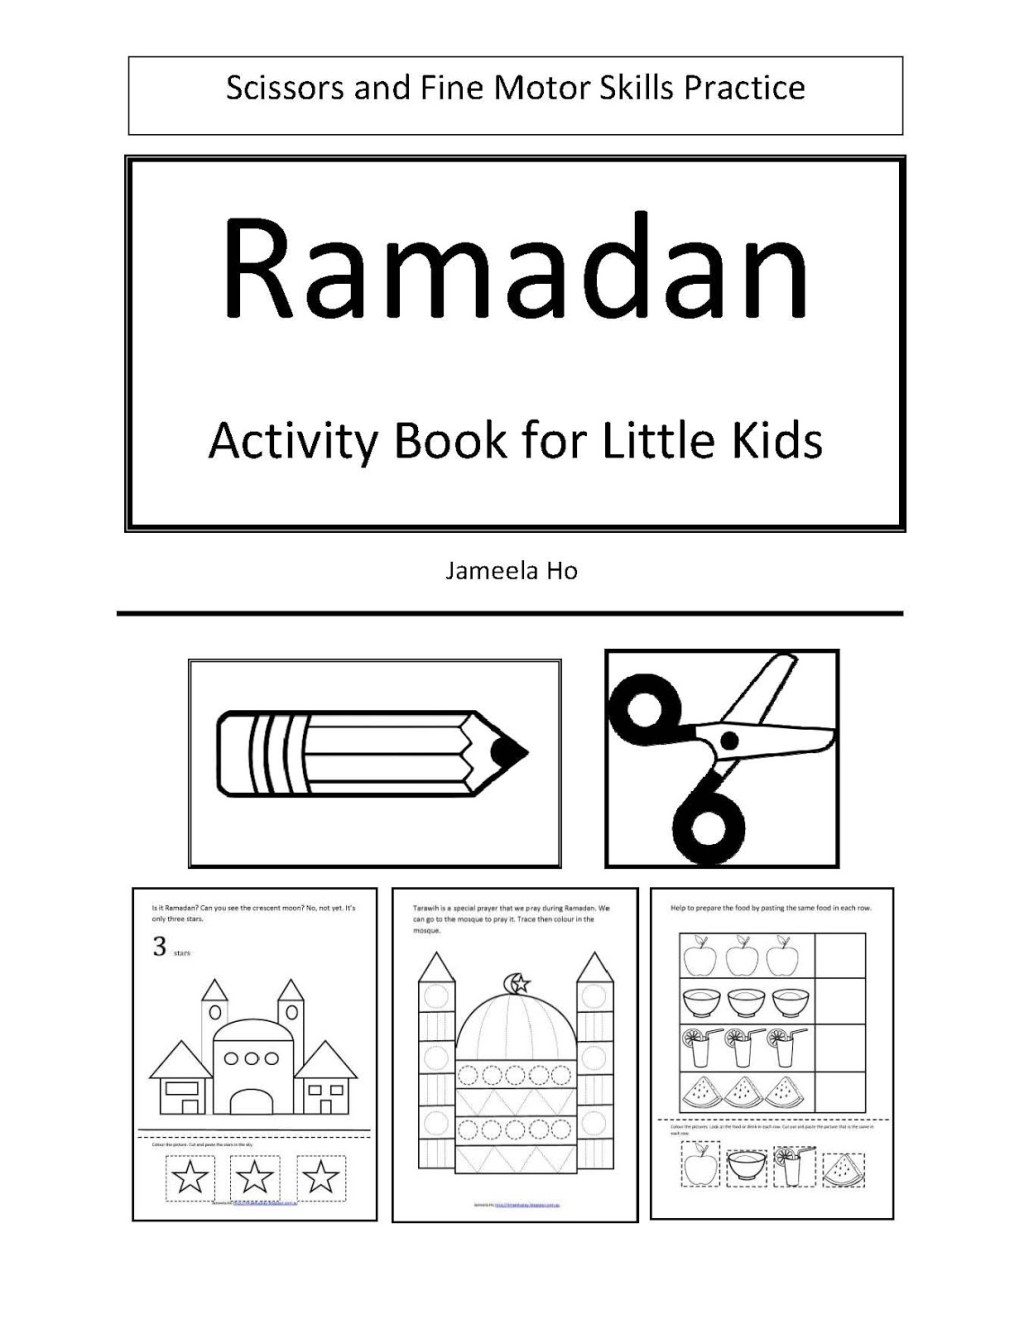 Picture of: ILMA Education: Free Download: Ramadan Activity Book for Little Kids